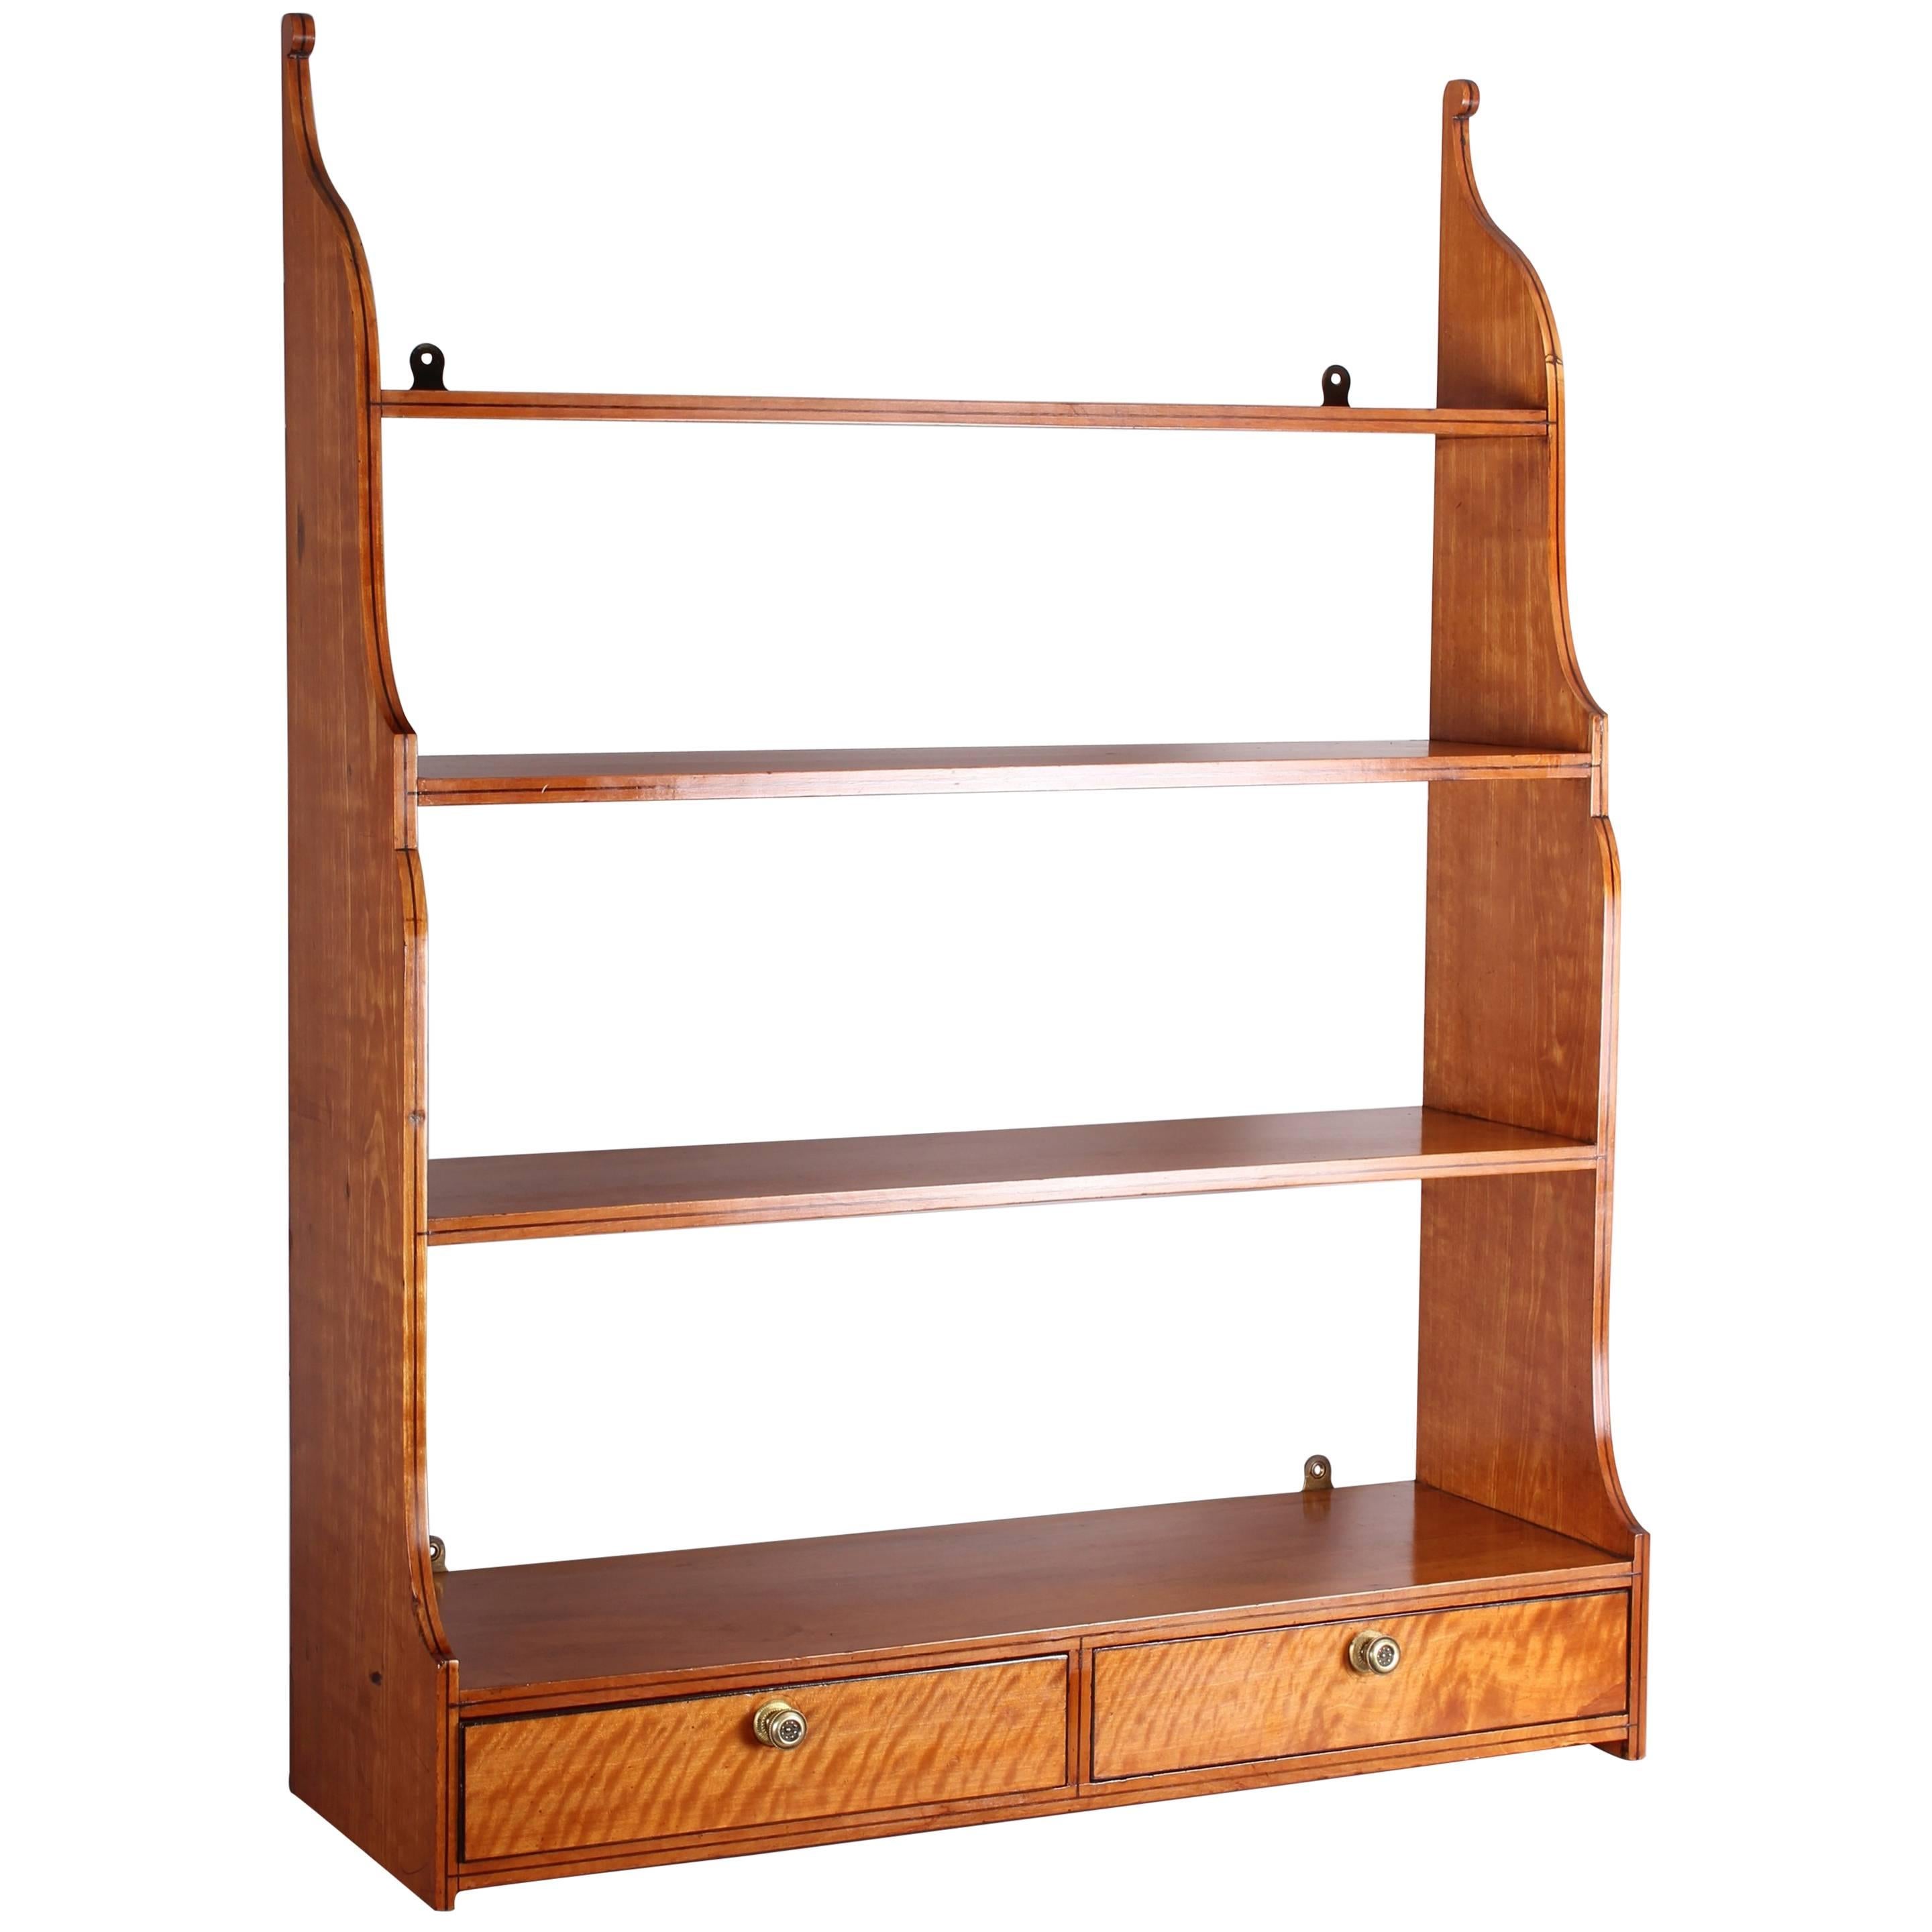 George III Period Hanging Shelves in Fine Quality Satinwood